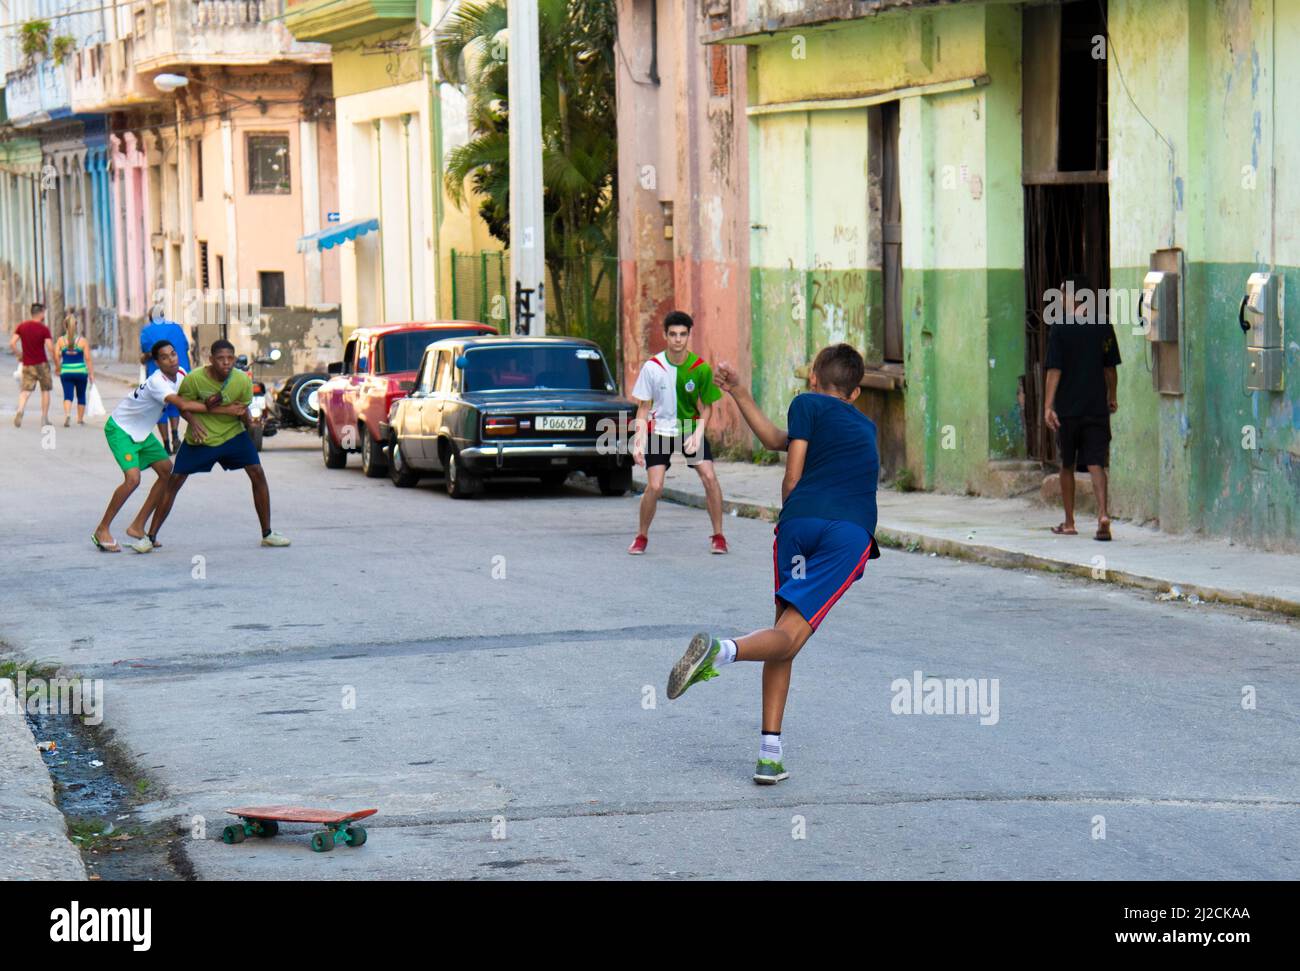 Young man hits and plays with a tennis ball and his friends on a street in Havana, Cuba in front of a skate board on the street. Stock Photo